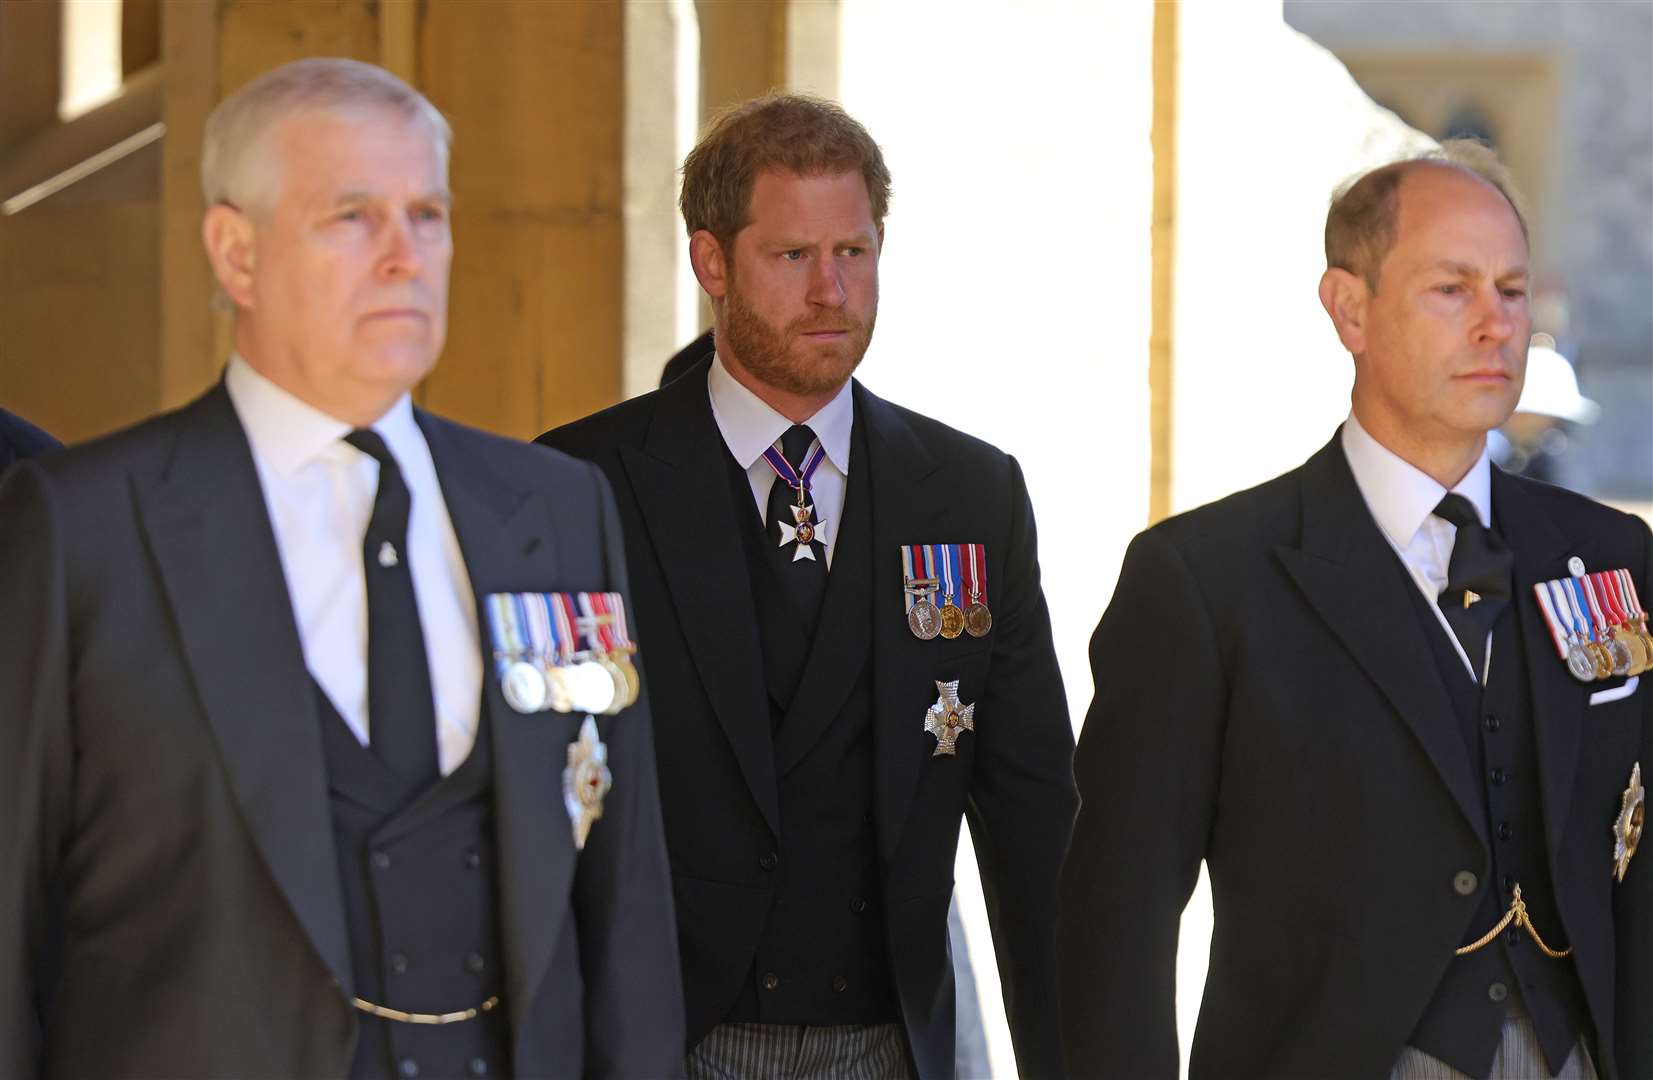 The Duke of Sussex, centre, with the Duke of York and the Earl of Wessex (Chris Jackson/PA)